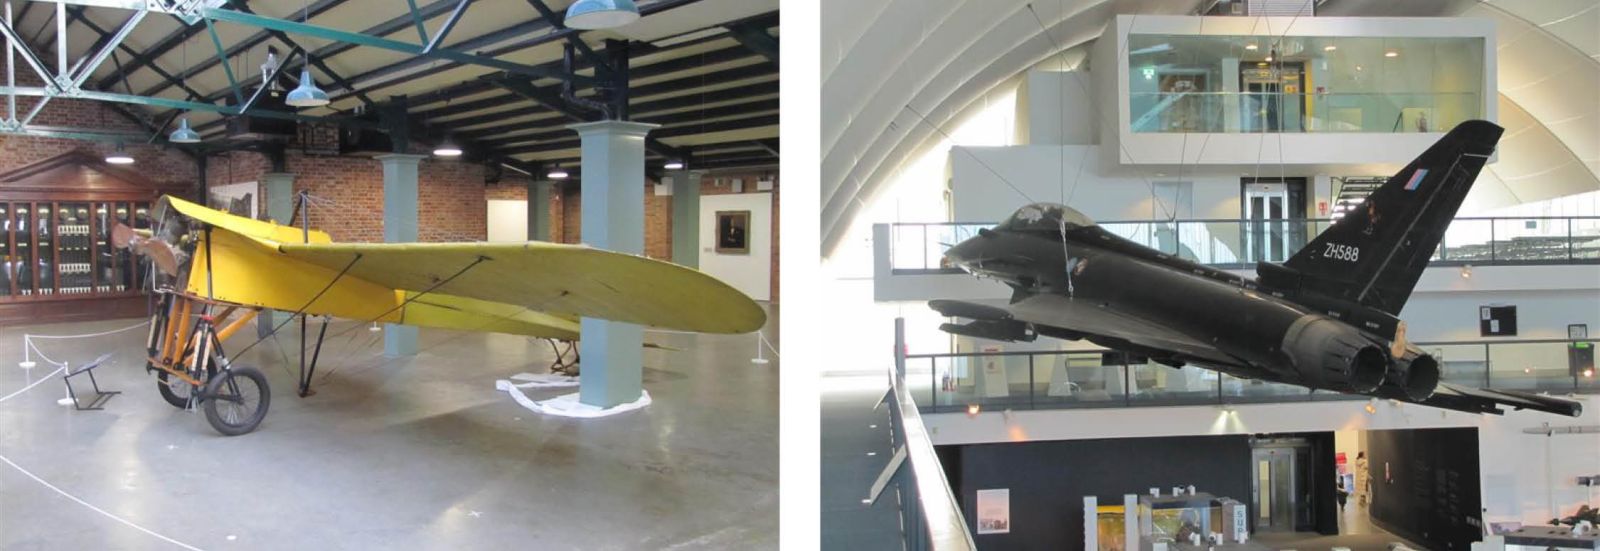 Pictures of Aircraft Left -  1911 Blériot XXVII  Right - Typhoon Fighter Jet